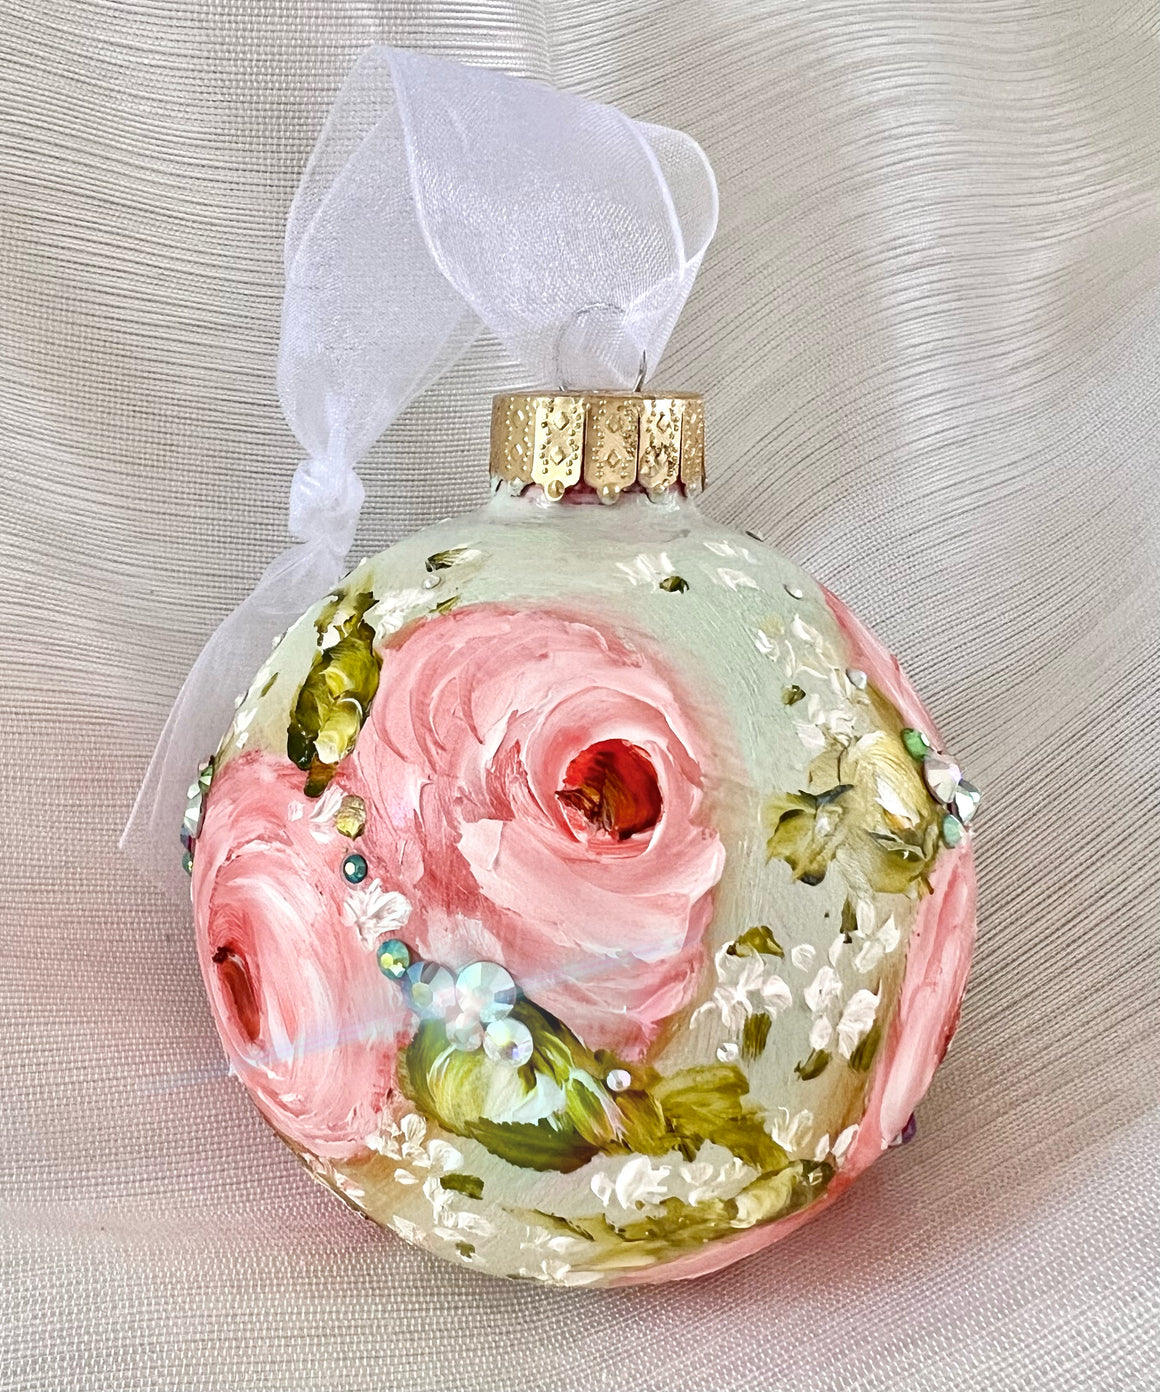 Mint Green with Pink Roses #7 Ornament 3"